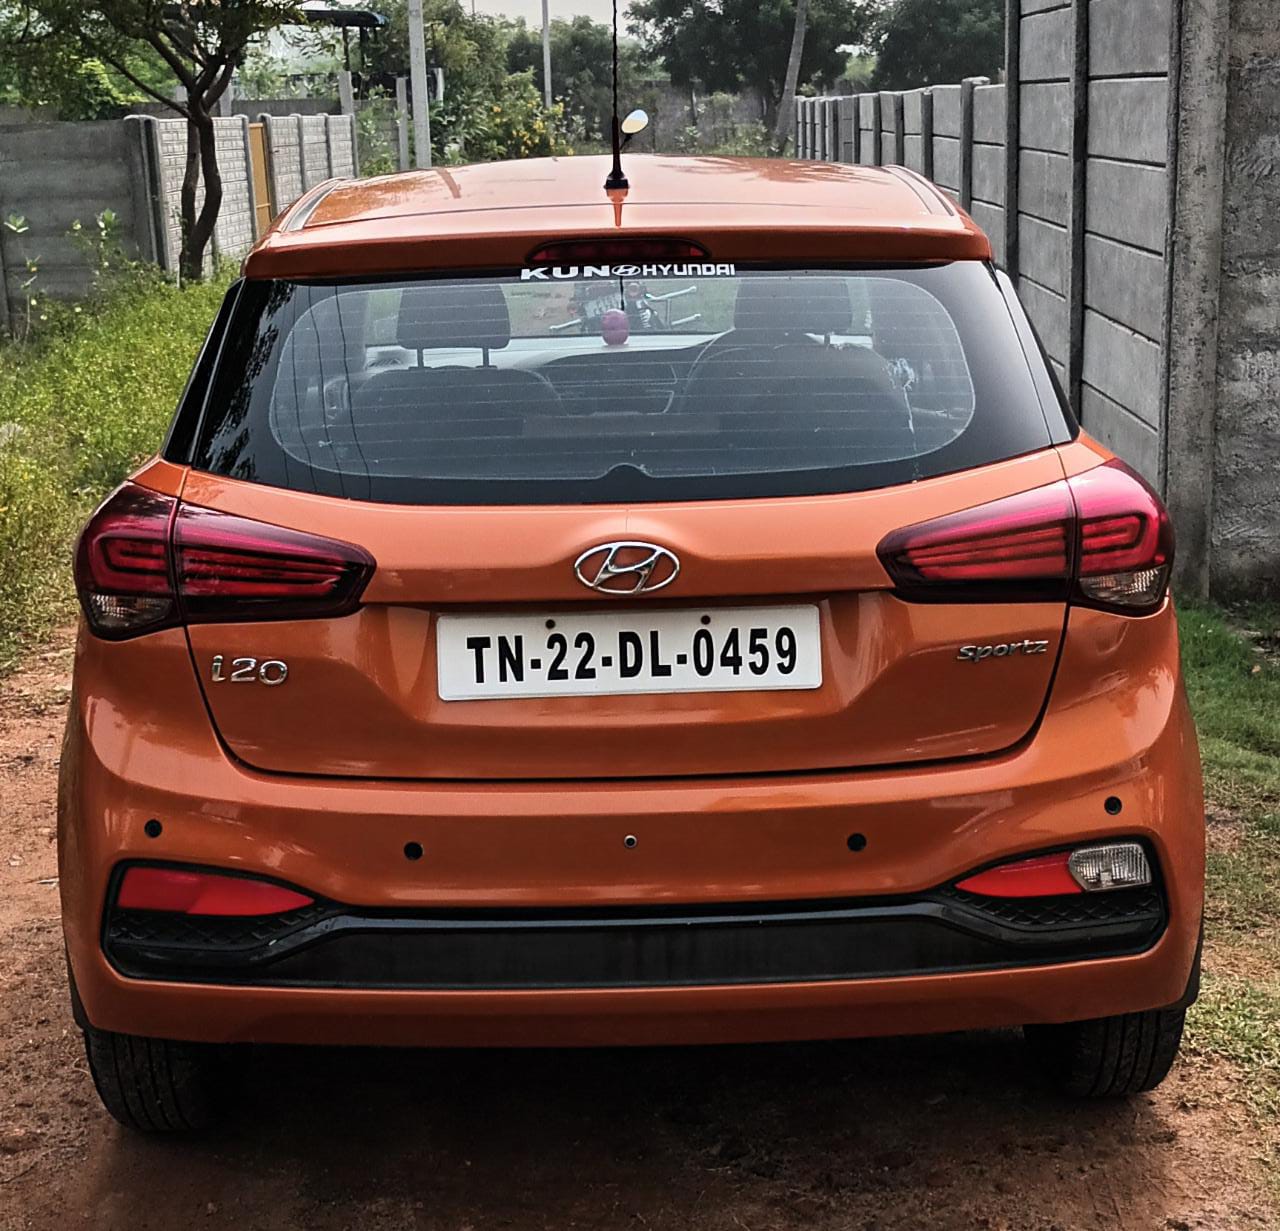 5432-for-sale-Hyundai-Elite-i20-Petrol-First-Owner-2018-TN-registered-rs-648000